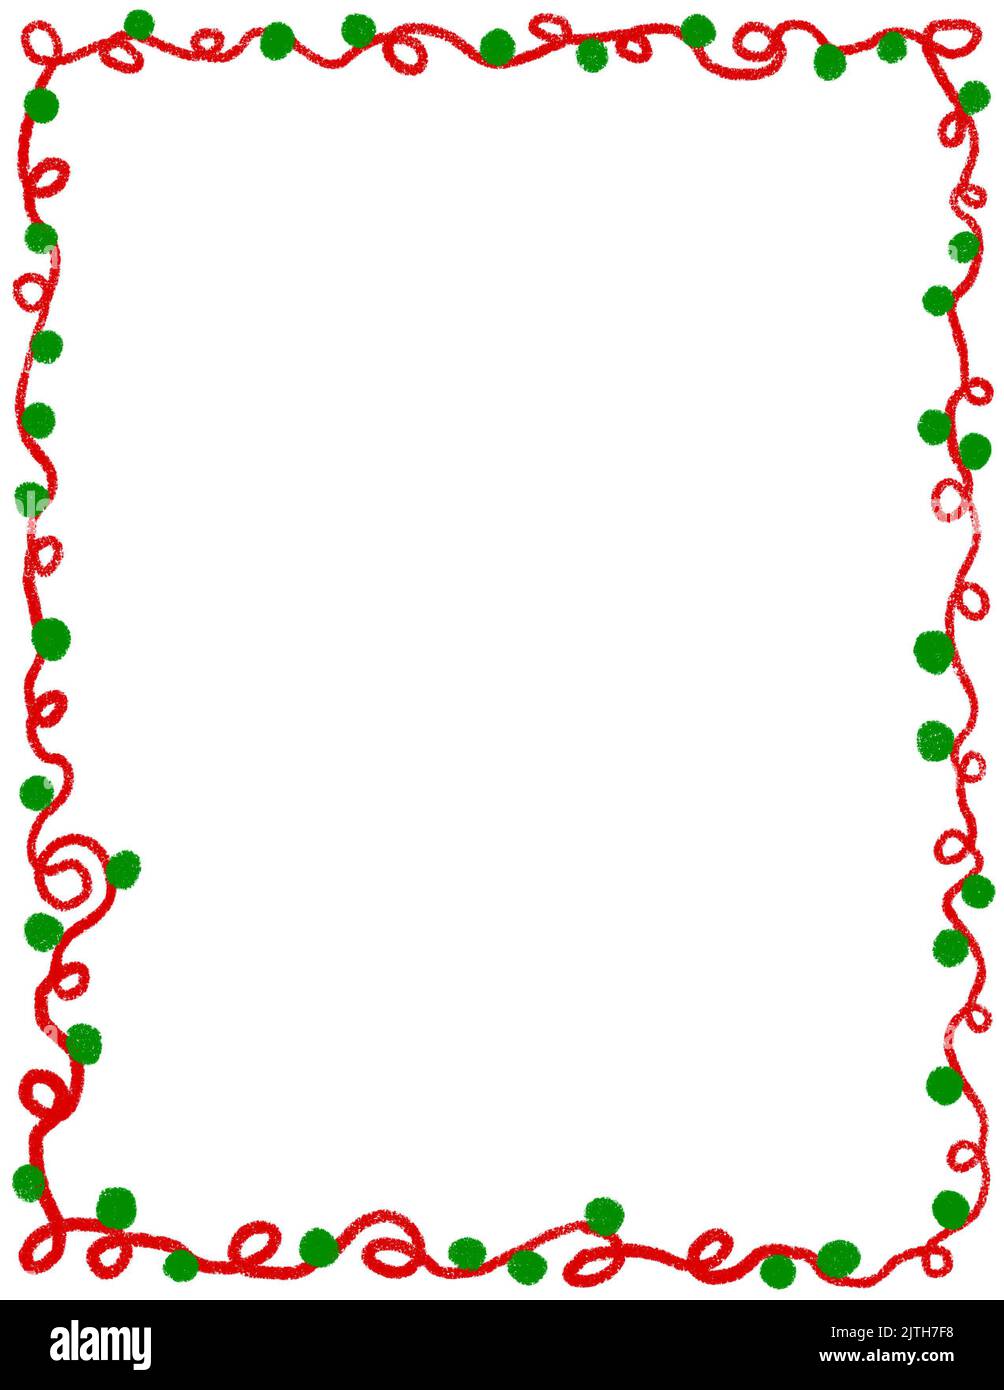 Hand drawn Christms frame with red green traditional ornaments and empty copyspace. December winter xmas decoration border, season holiday decor edge design, simple minimalist style doodle cartoon Stock Photo